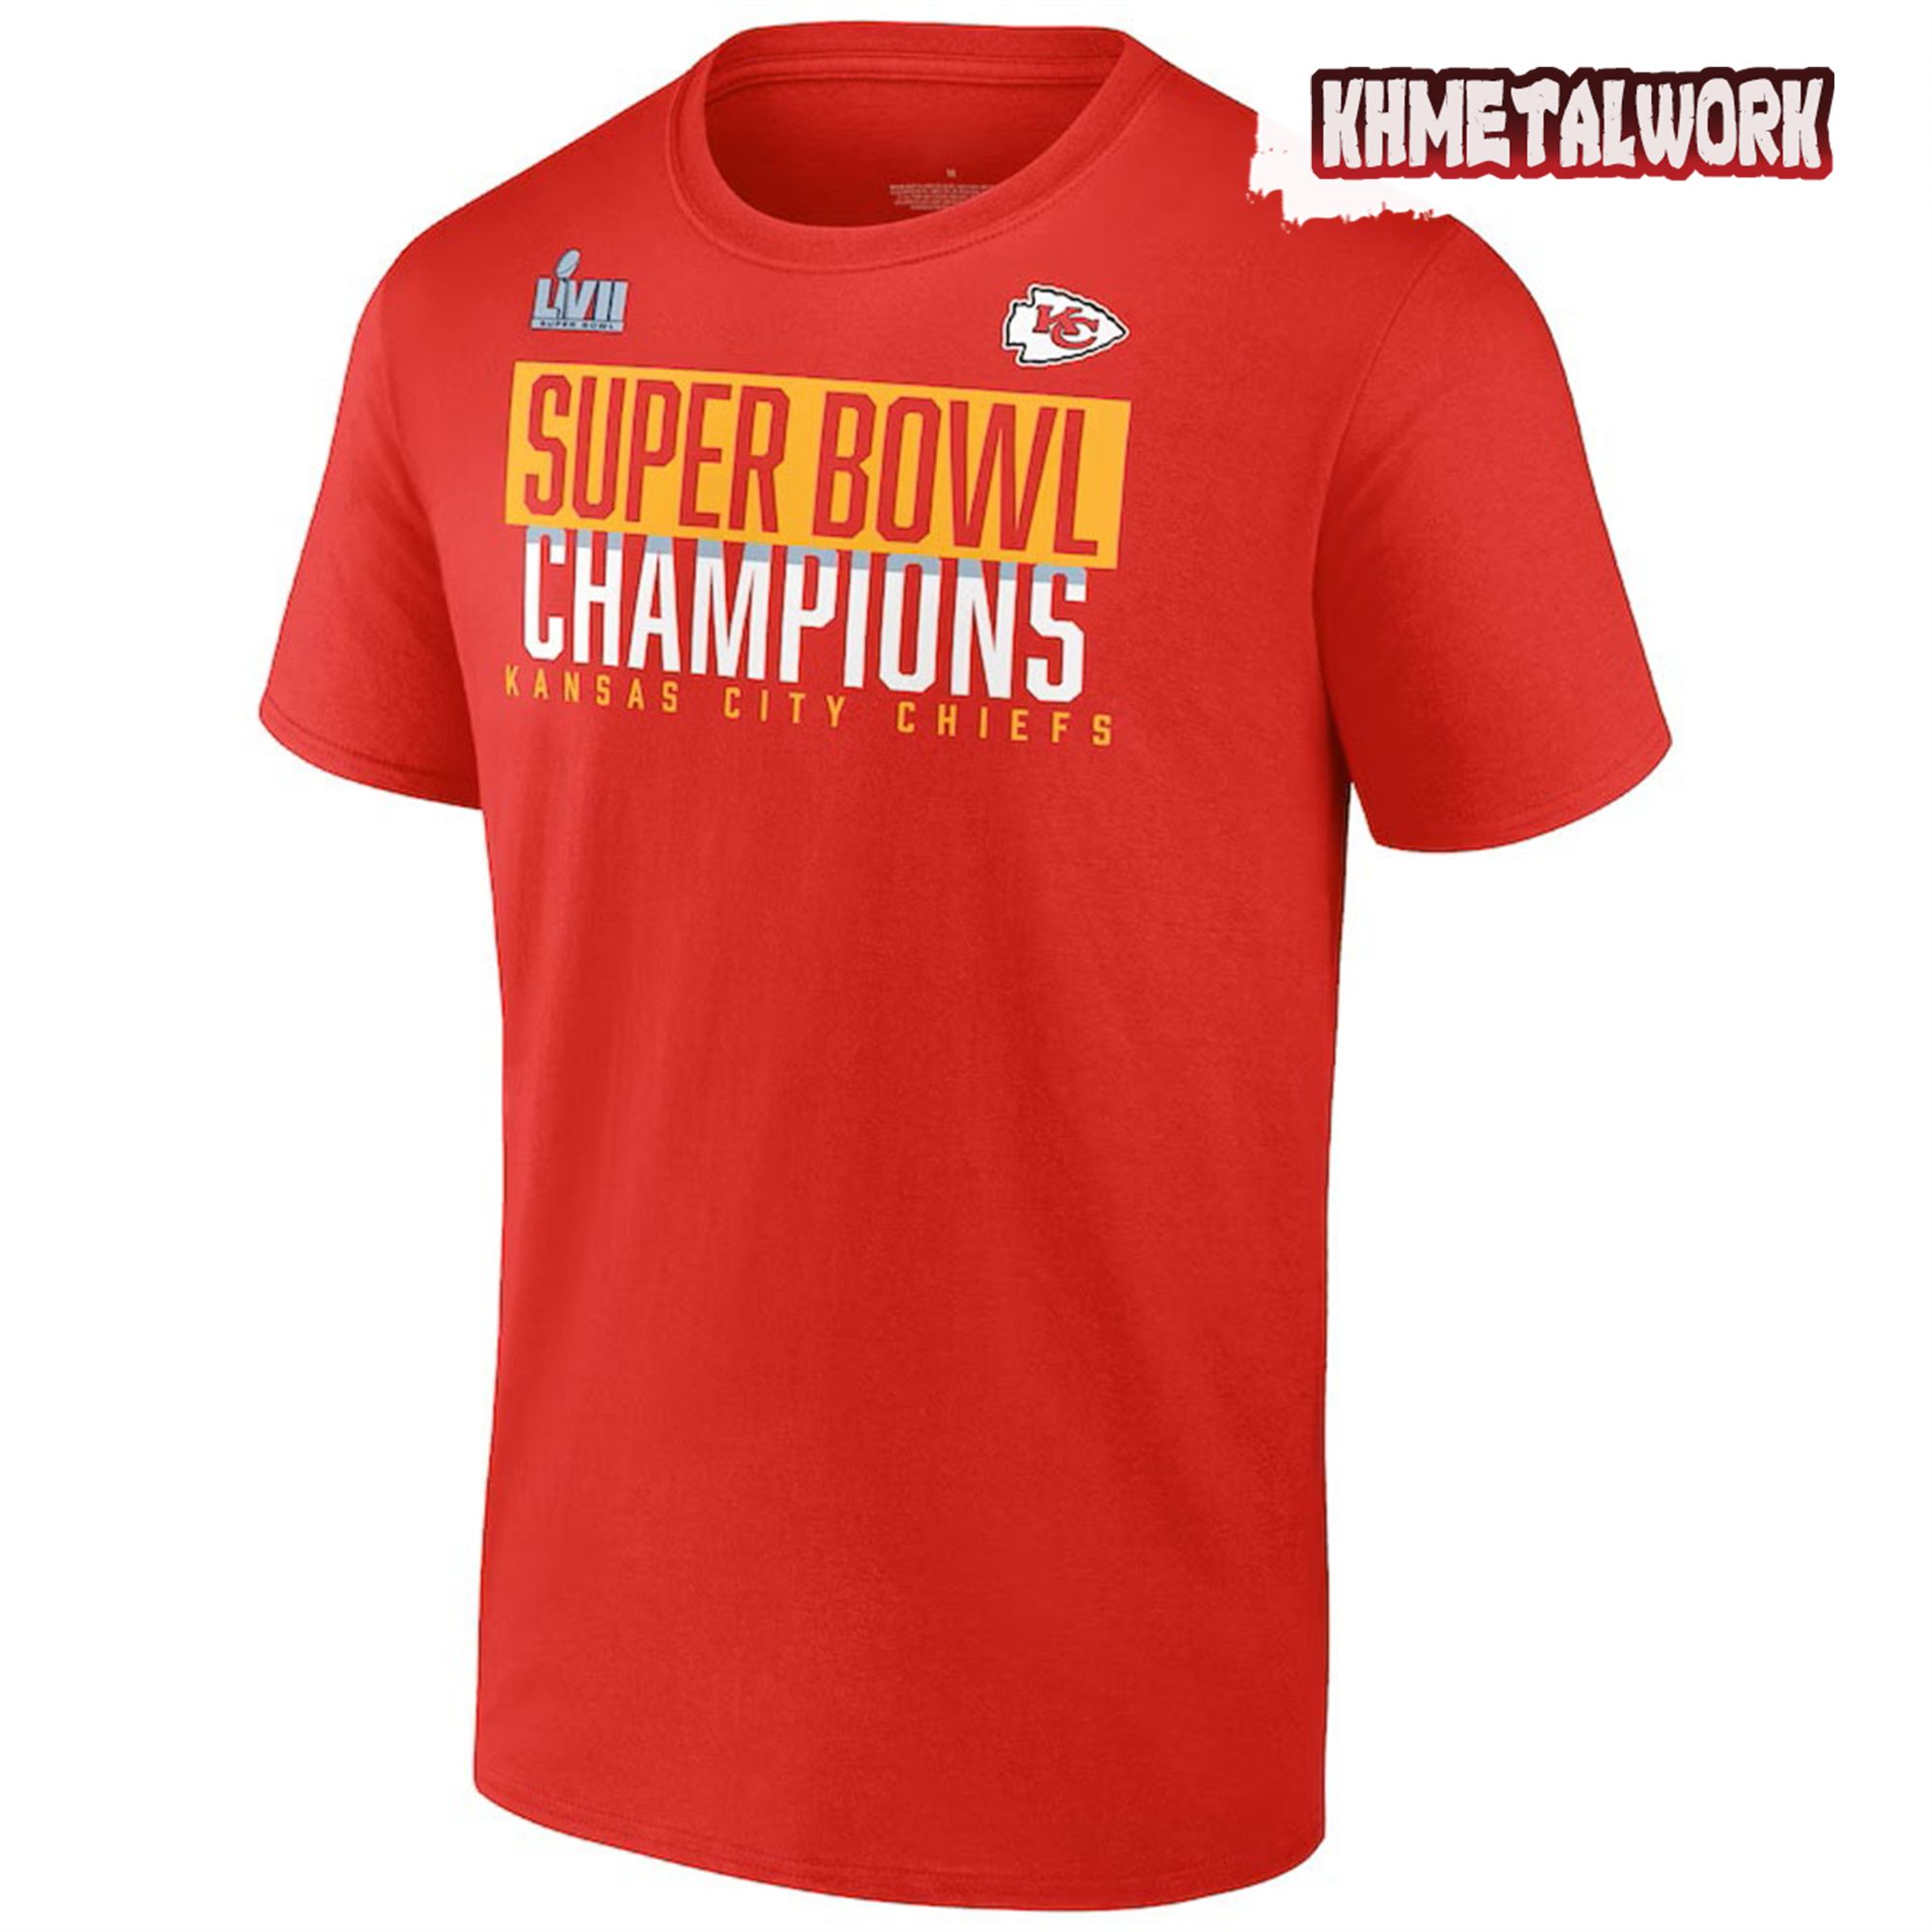 Celebrate Chiefs' Victory With Super Bowl Lvii Champions Foam Finger T-shirt